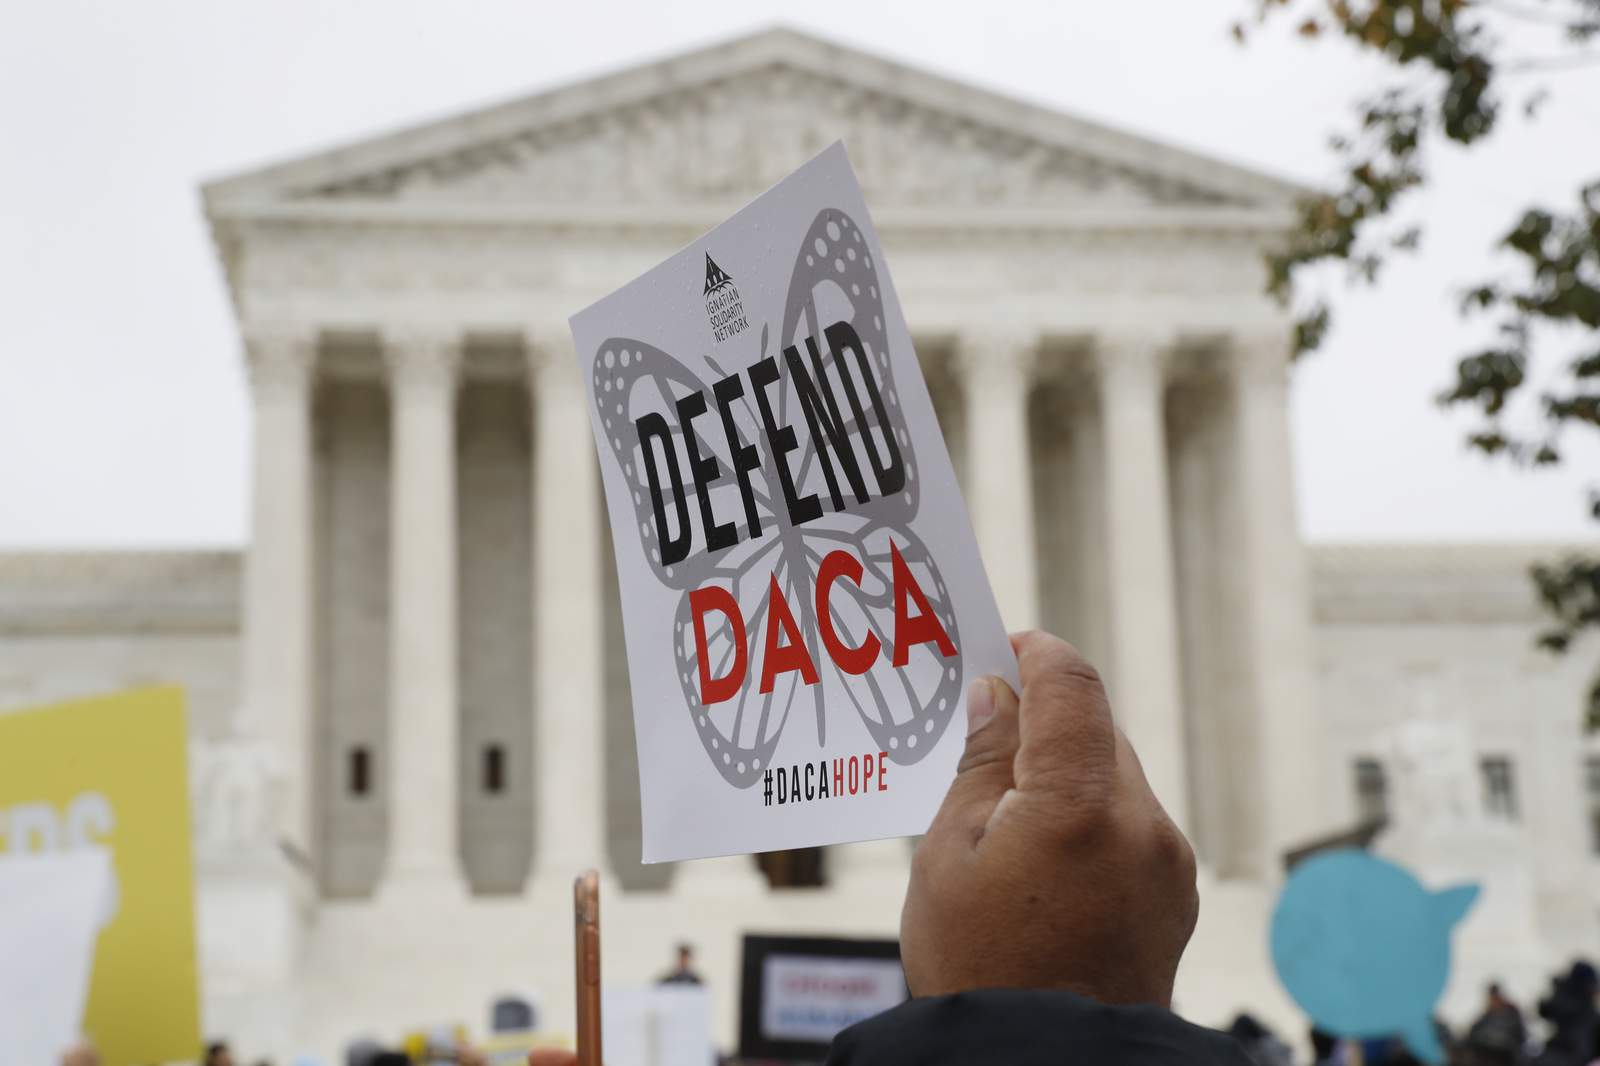 No immediate ruling after hearing on fate of DACA program